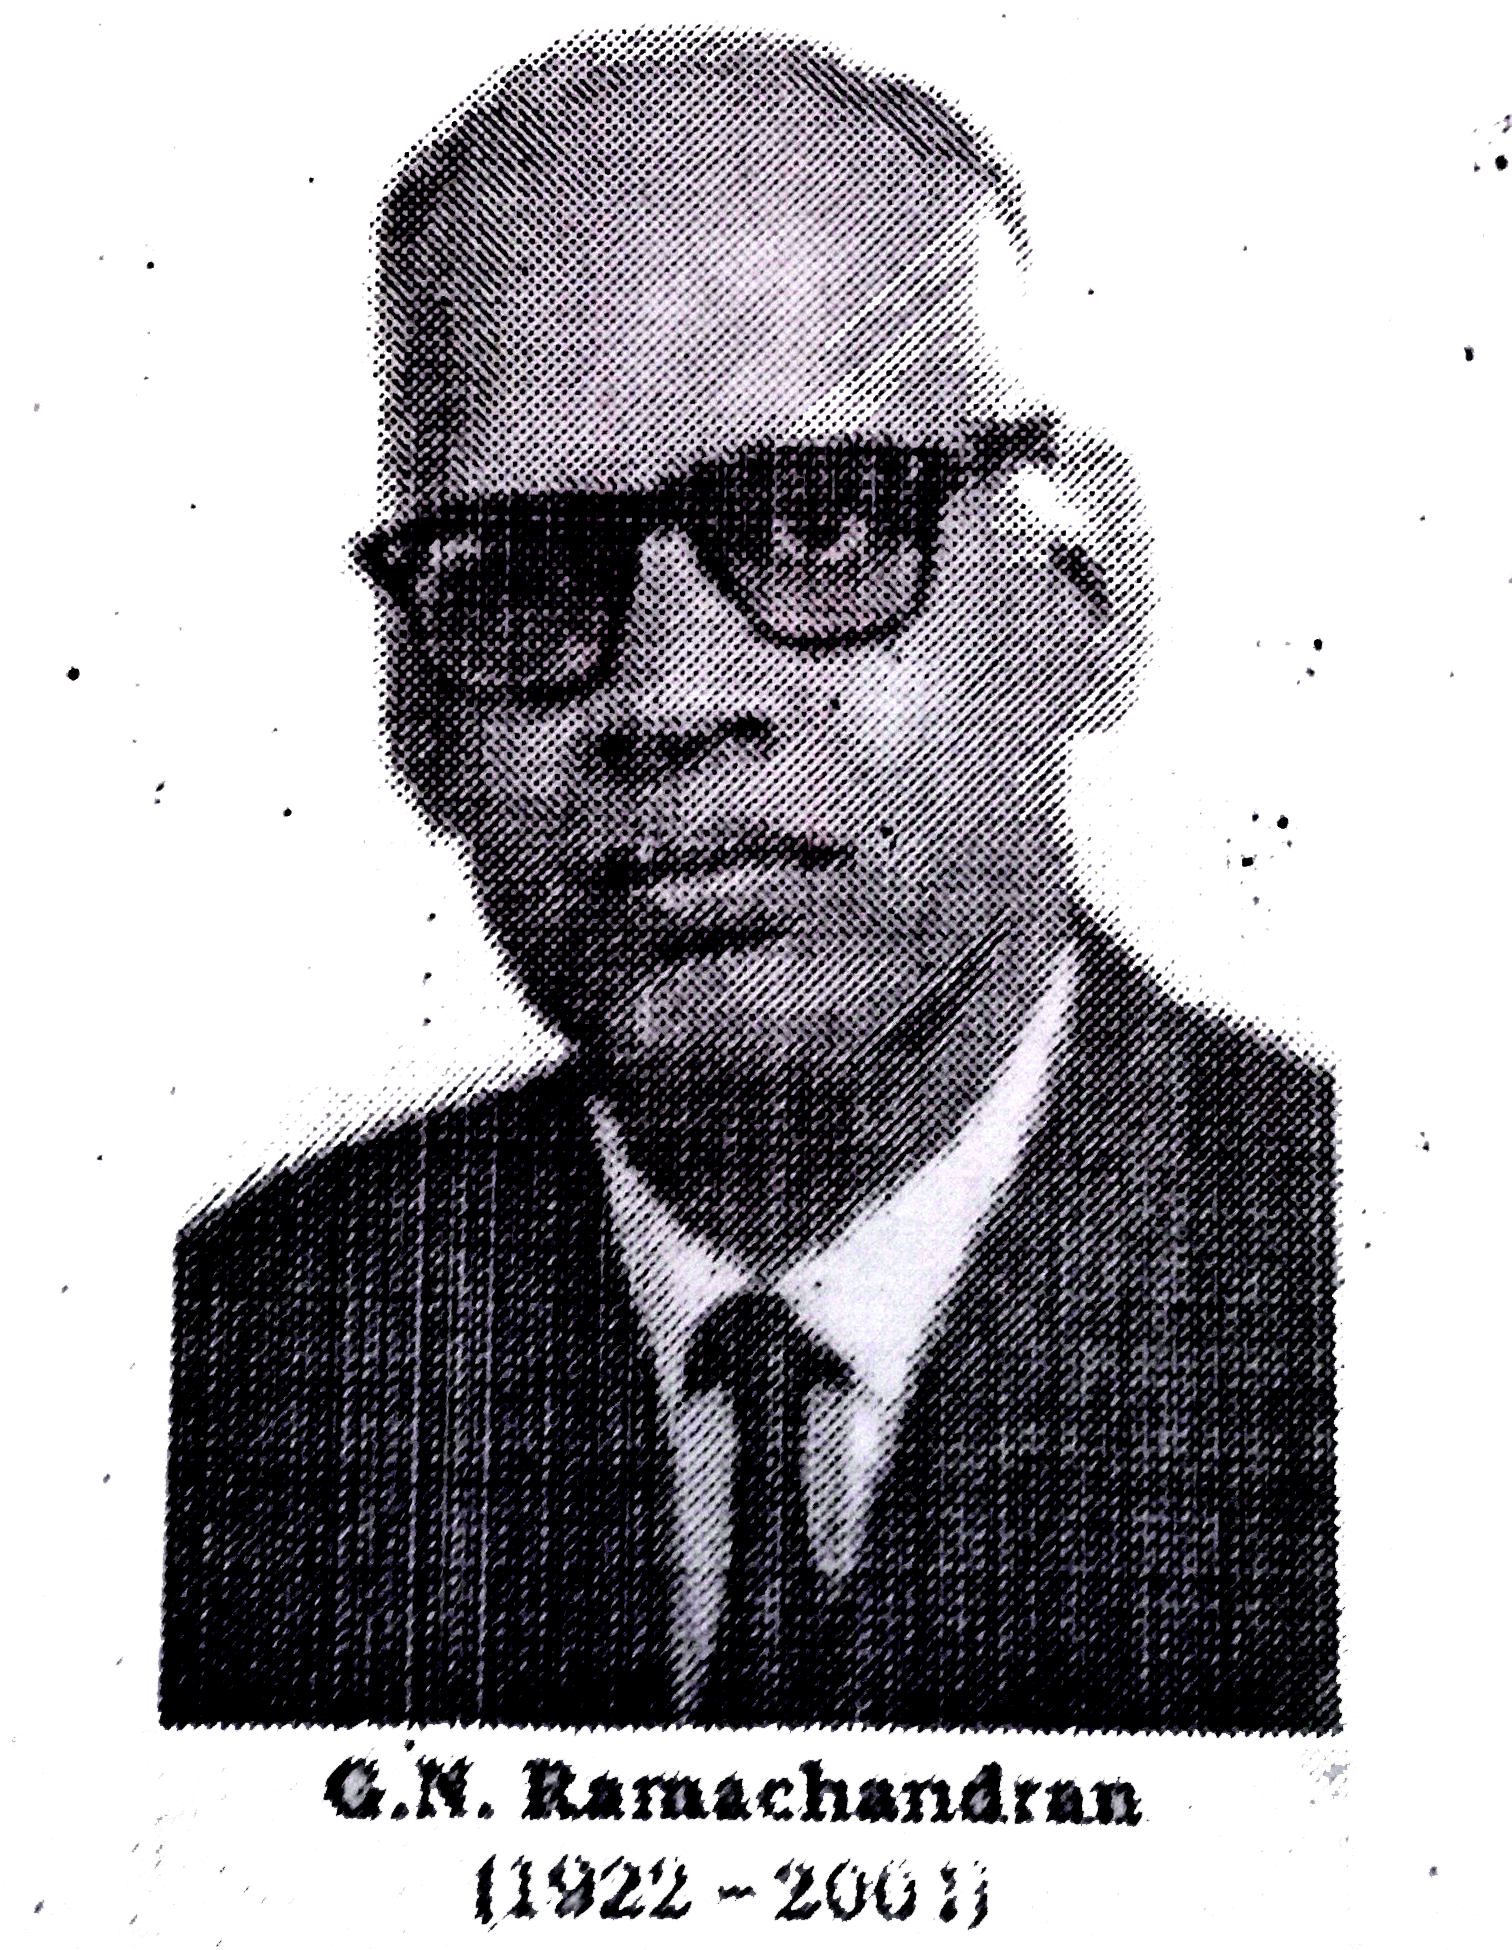 G.N. RAMACHANDRAN, an outstanding figure in the field of protein structure, was the founder of the ‘Madras school’ of conformational analysis of biopolymers. His discovery of the triple helical structure of collagen published in Nature in —————- and his analysis of the allowed conformations of ——————through the use of the ‘Ramachandran plot’ rank among the most outstanding contributions in structural biology.